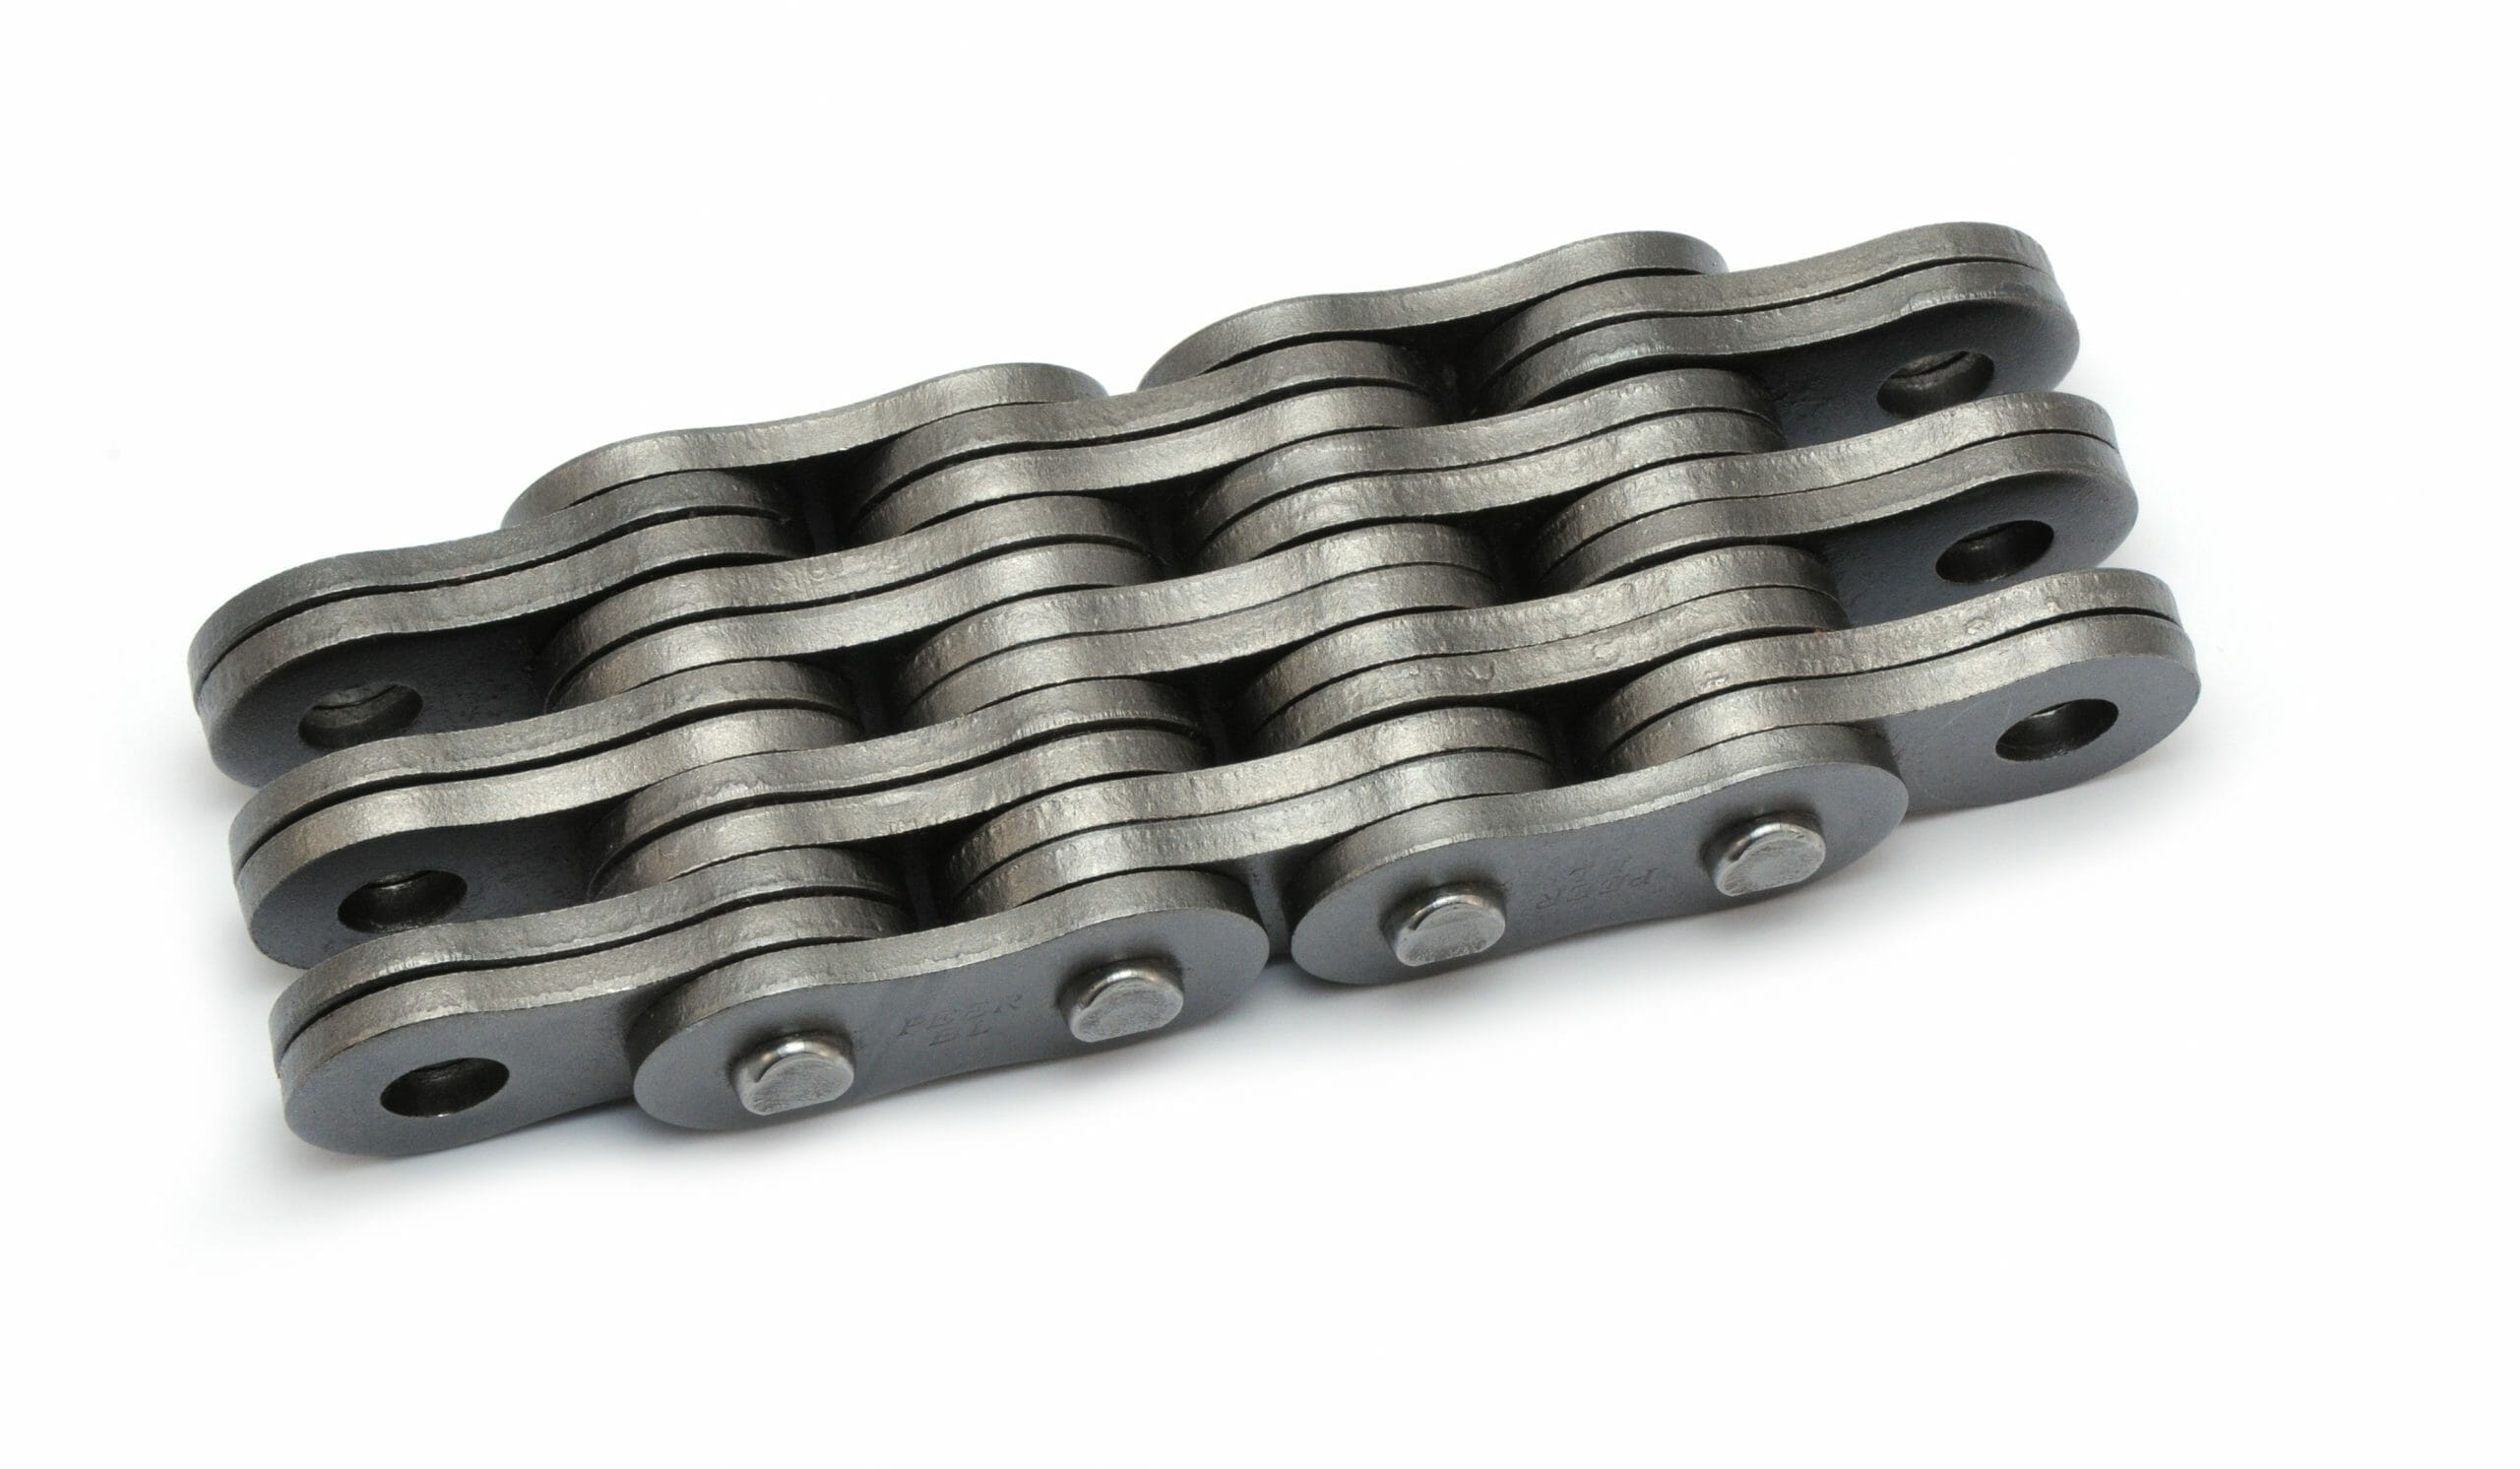 4.09 mm Plate Thickness BL 834 ANSI Number 25.4 mm Pitch LH1634 ISO Number 1-005 33.76 mm Pin Length, 3x4 Plate Lacing Ametric BL 834 CP BL Series Leaf Chain 24.13 mm Plate Depth 9.54 mm Pin Diameter 